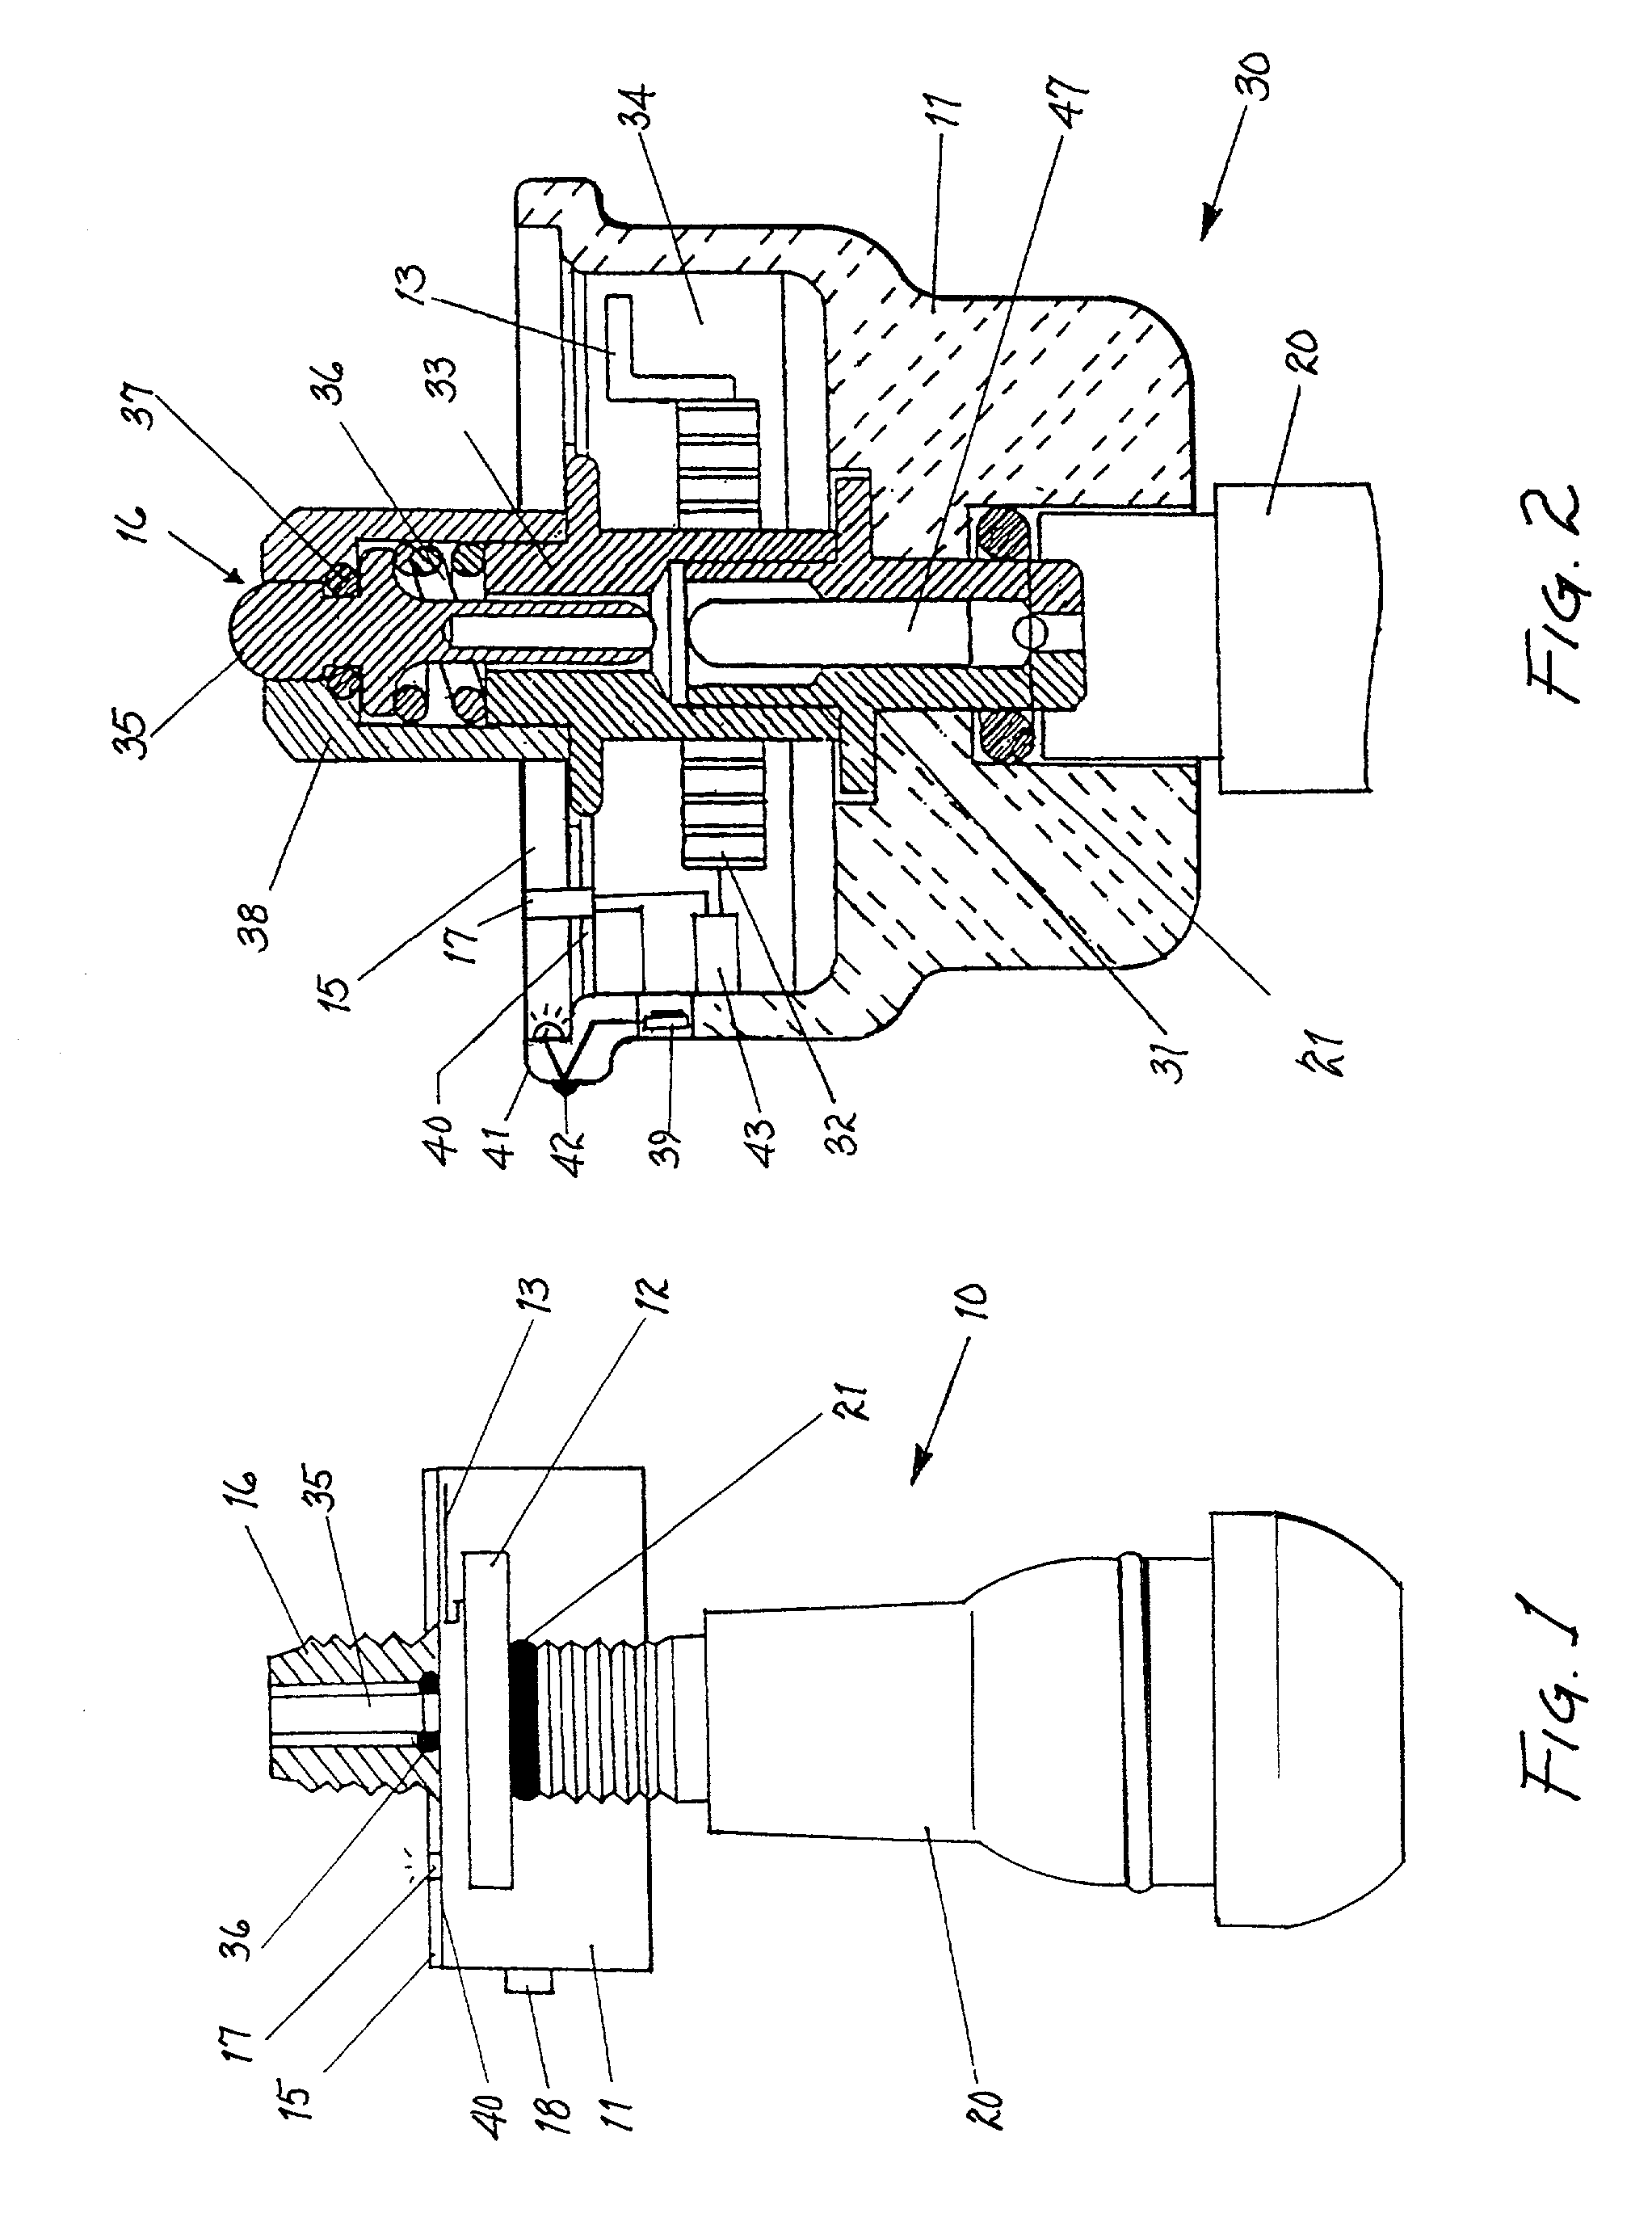 Air pressure gauge assembly for continuous monitoring of tire inflation pressure